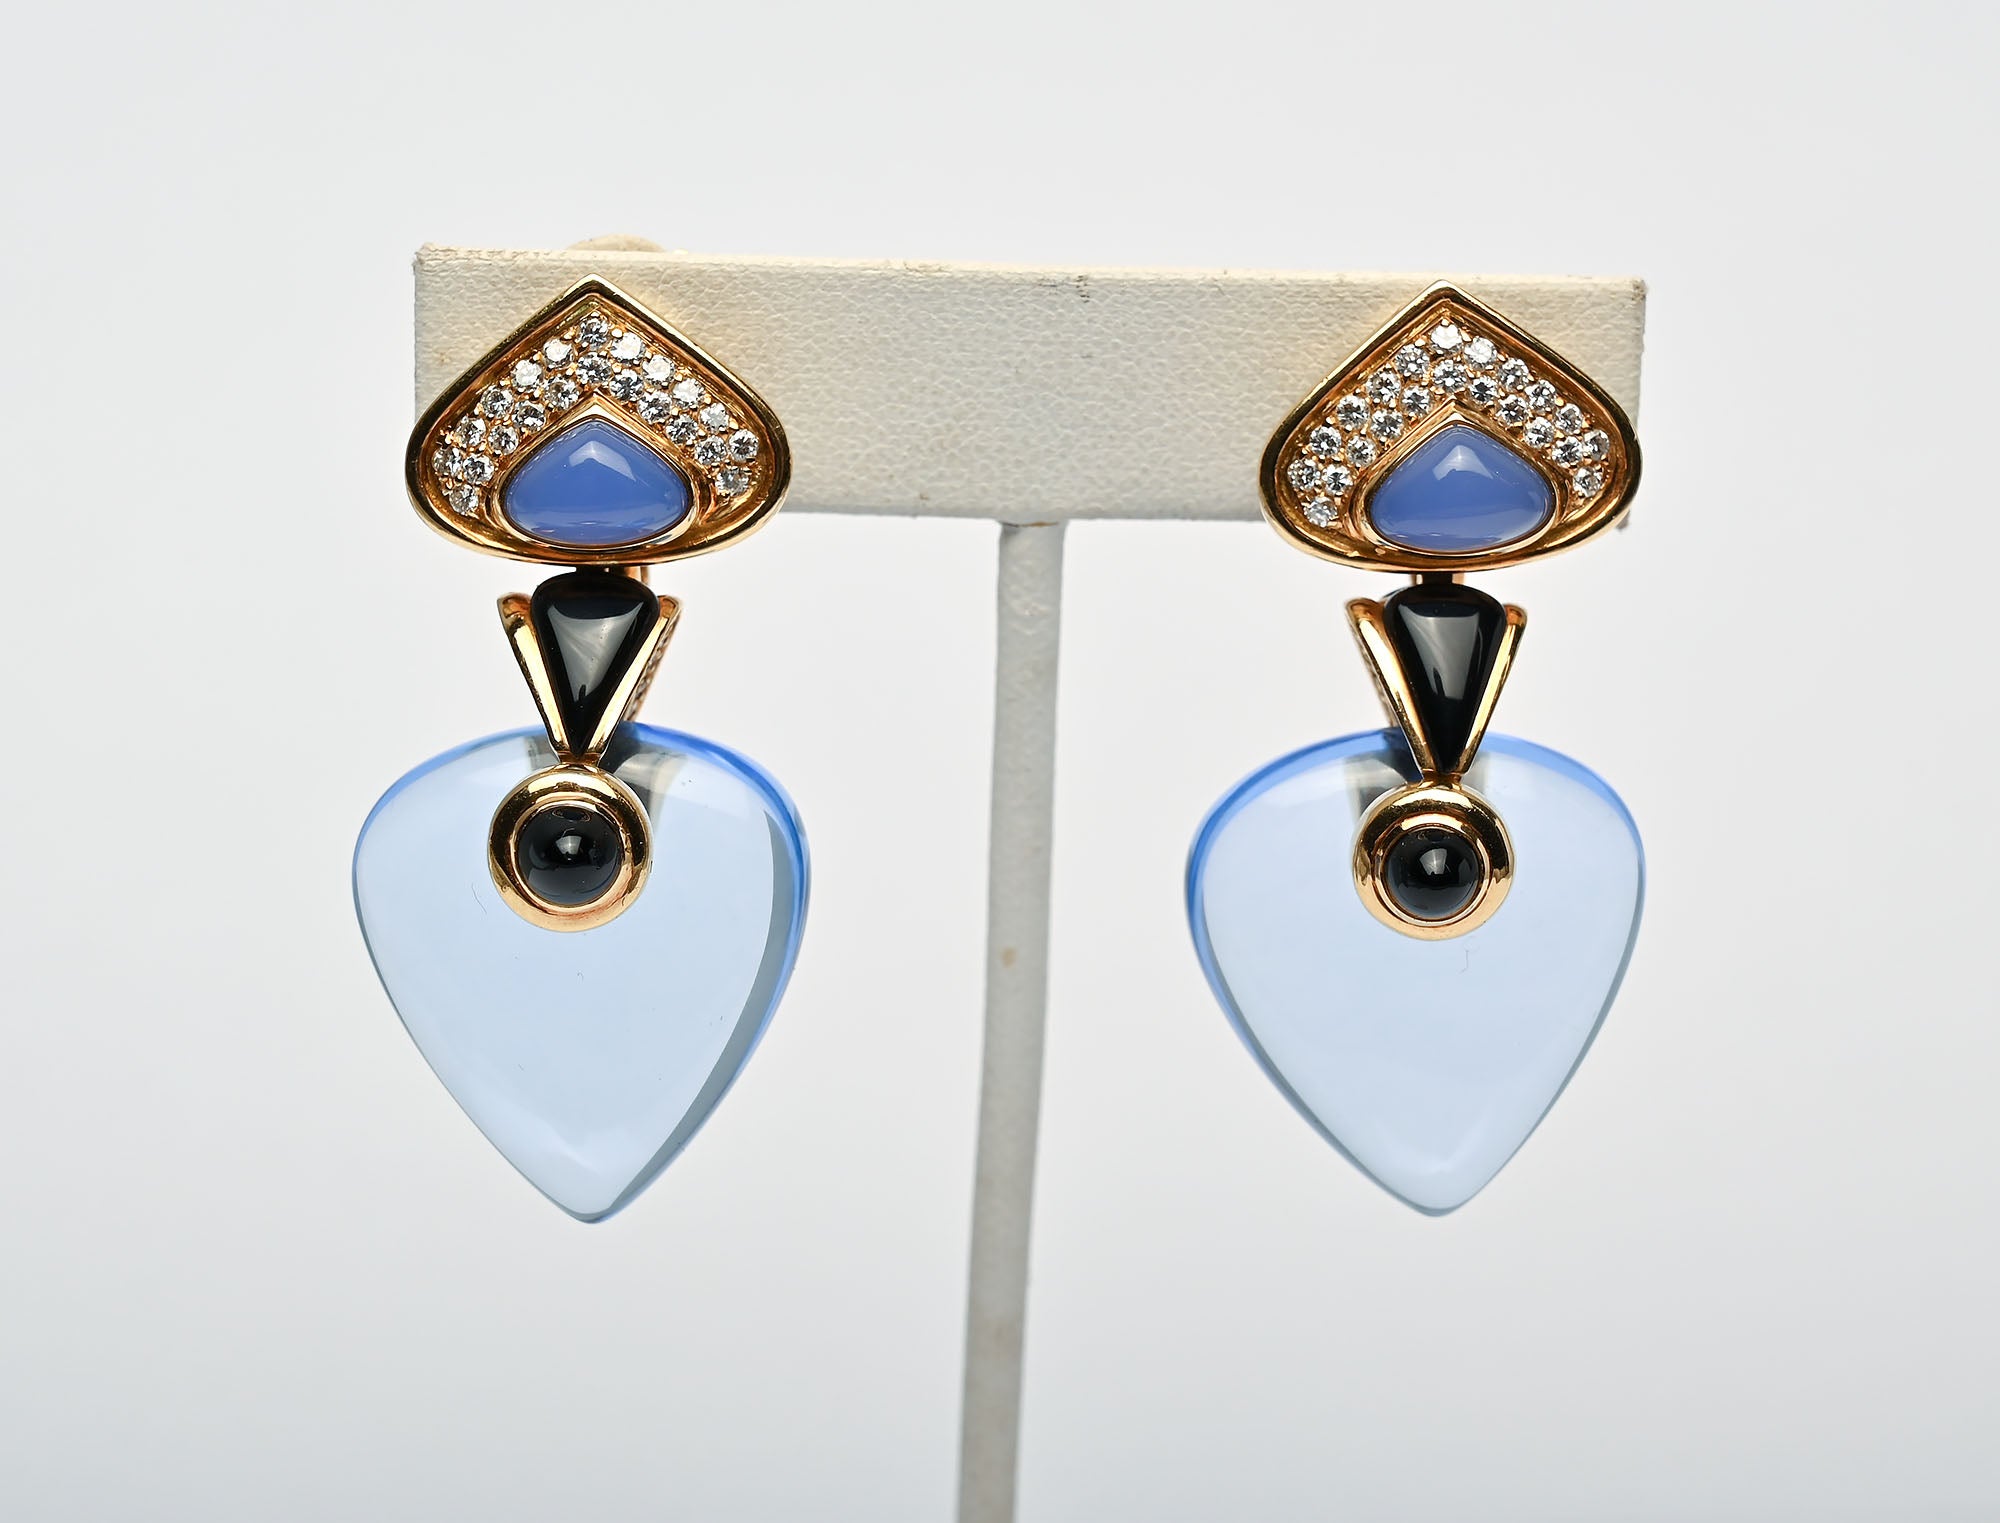 Totally stunning and versatile dangle earrings by Marina B of the famed Bulgari family. 
The top of the earrings is diamond studded with a triangular chalcedony . Below that are triangular  and round black onyx stones. The total length of the